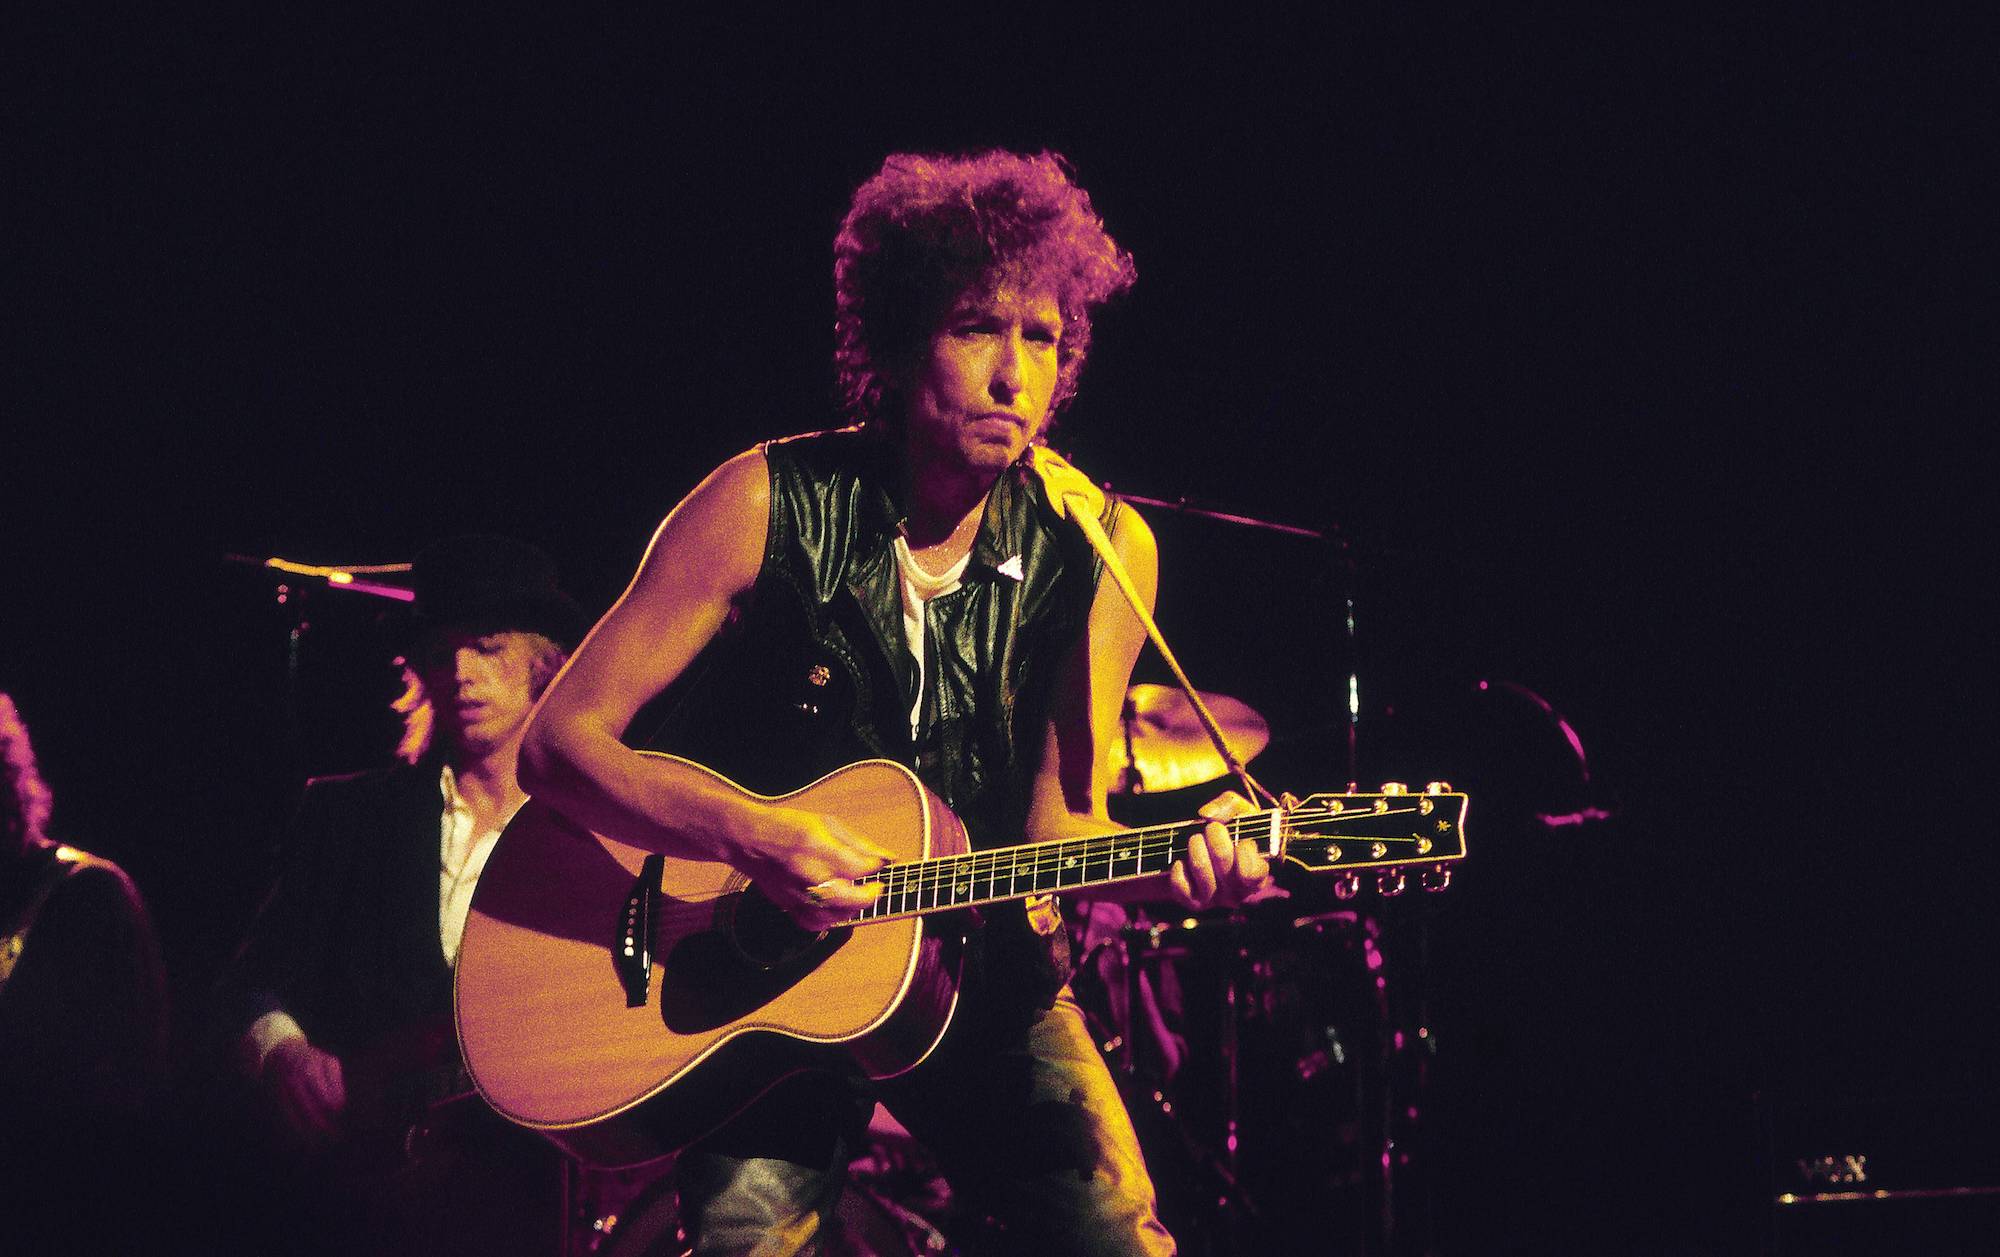 Bob Dylan on stage, playing guitar